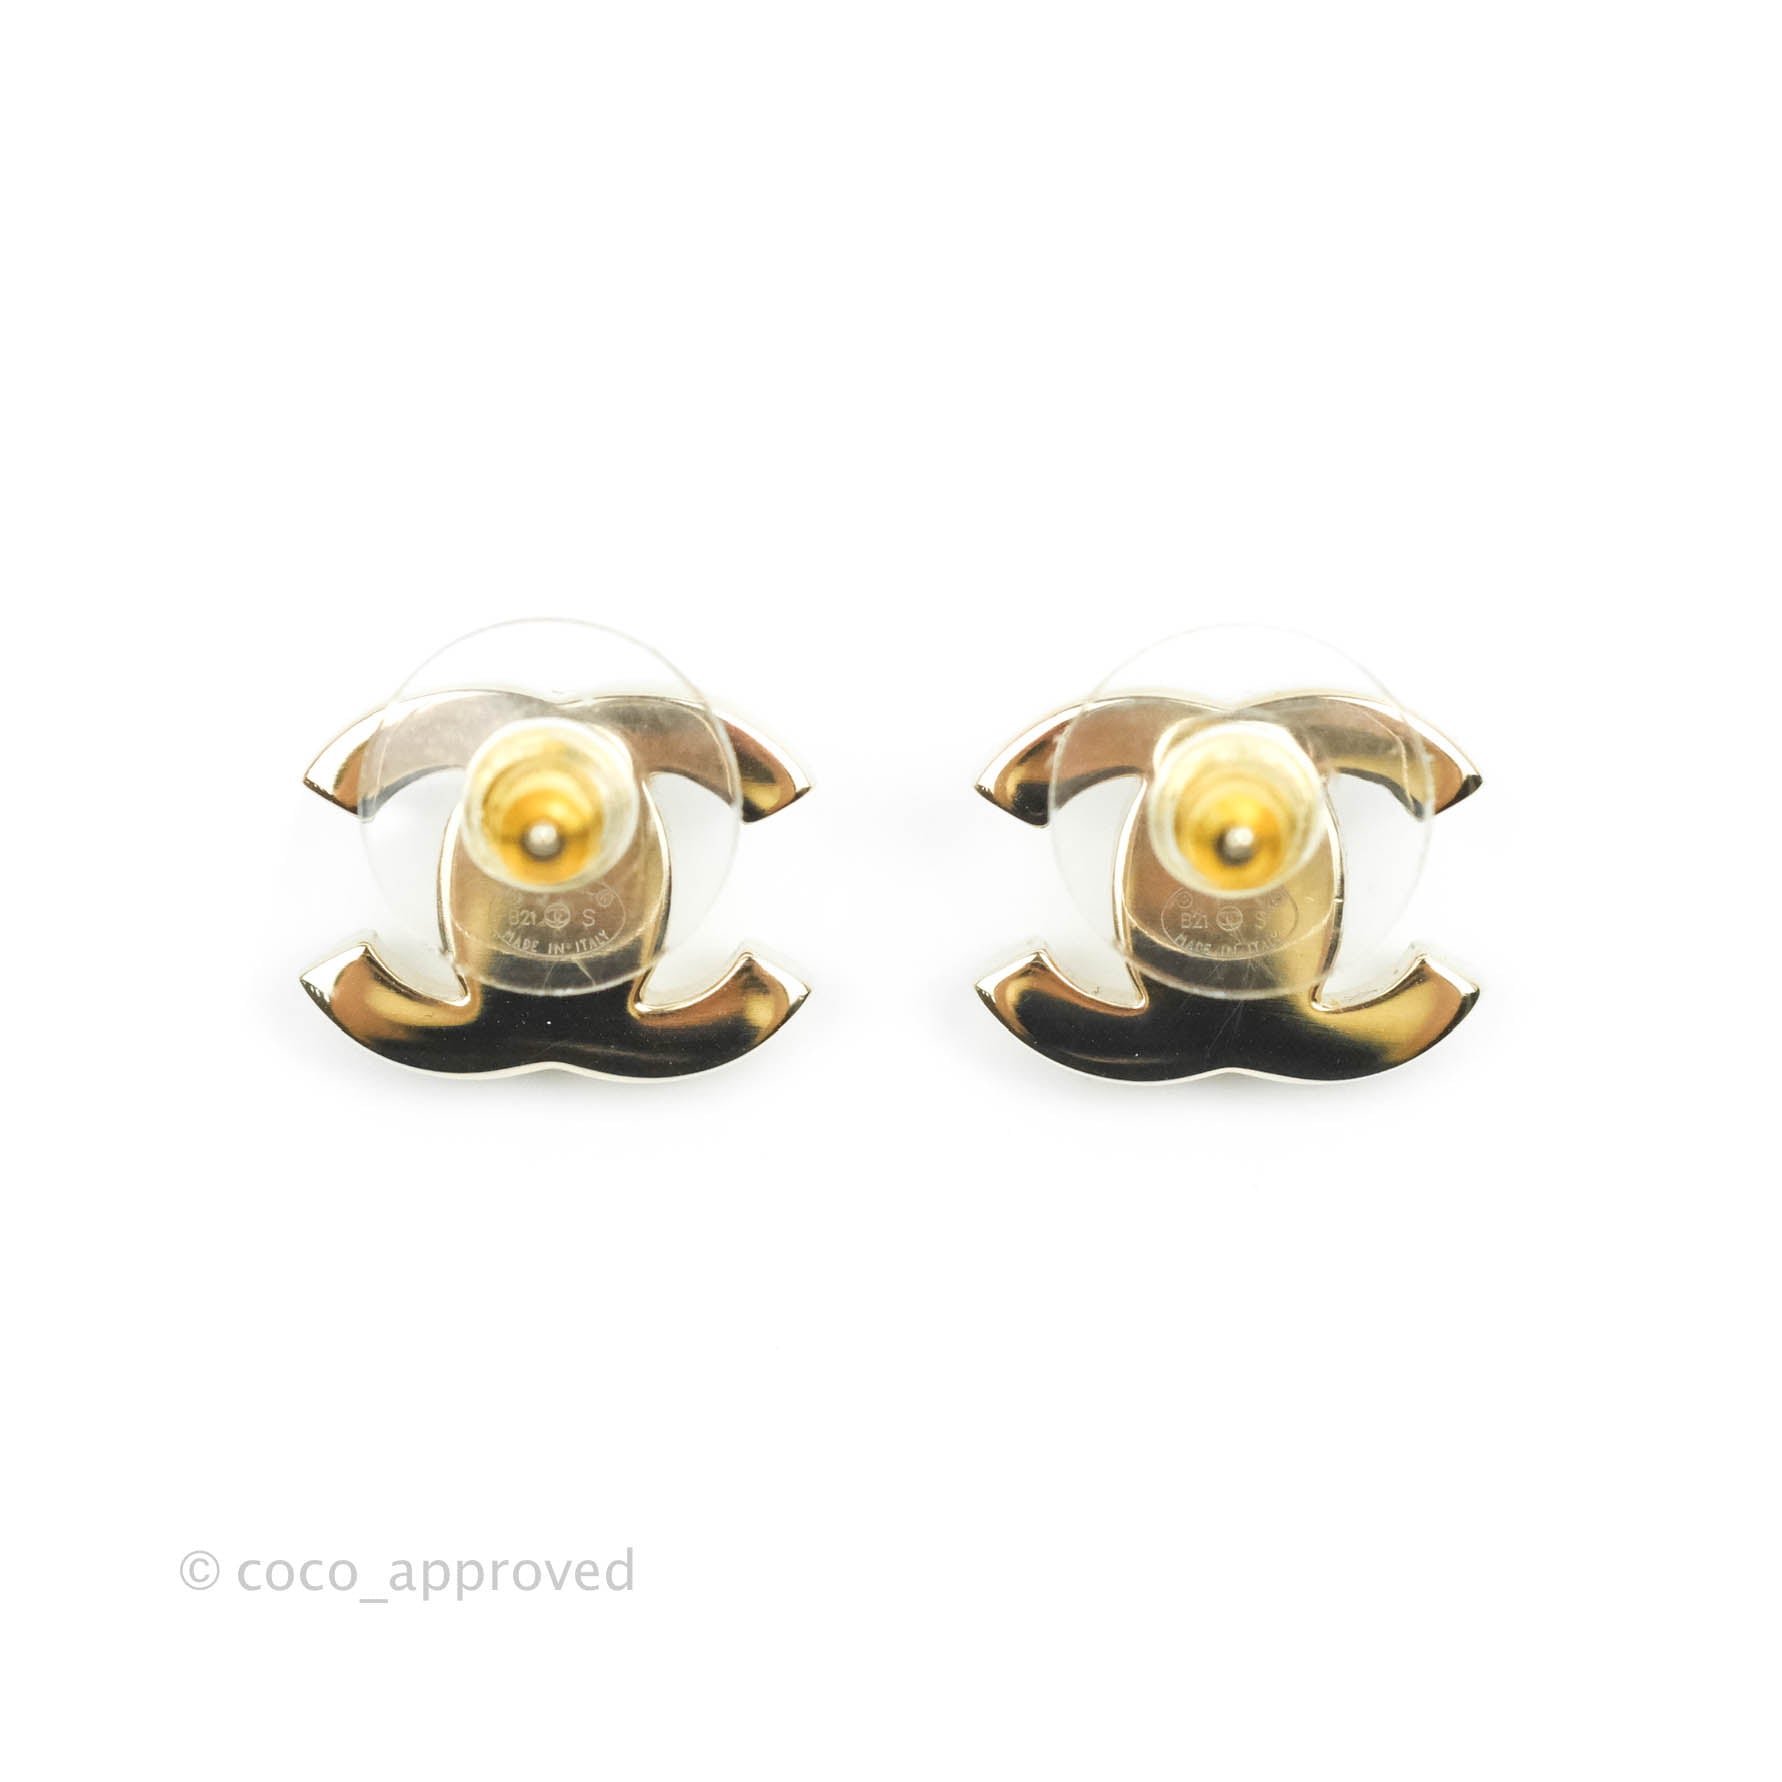 Chanel CC Turn Lock Earrings Gold Tone 21S – Coco Approved Studio